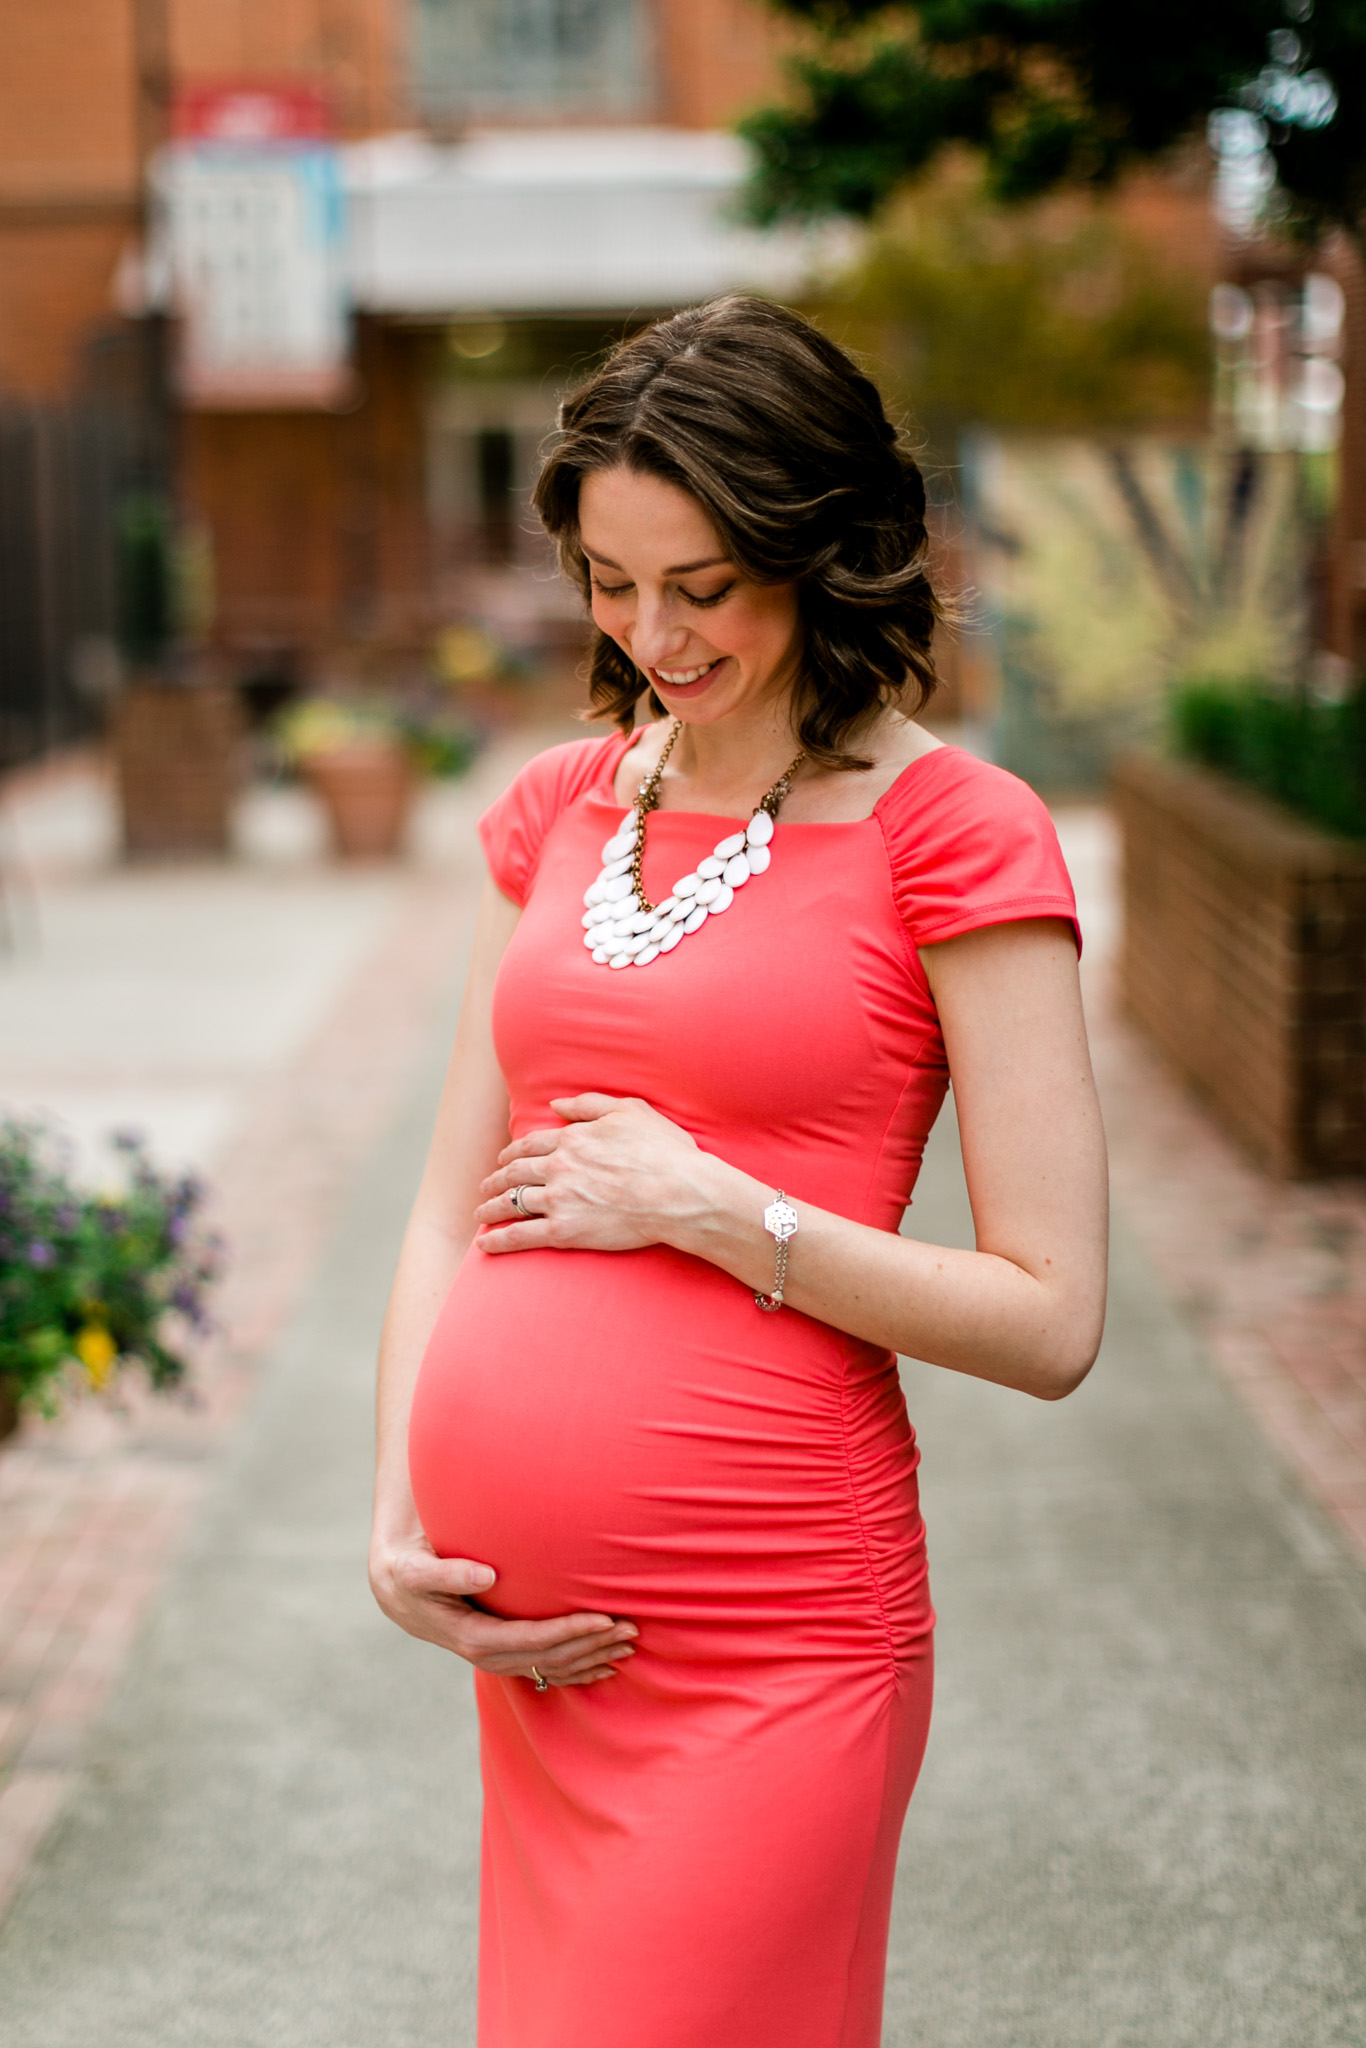 Woman holding hands on baby bump | Durham Family Photographer | By G. Lin Photography